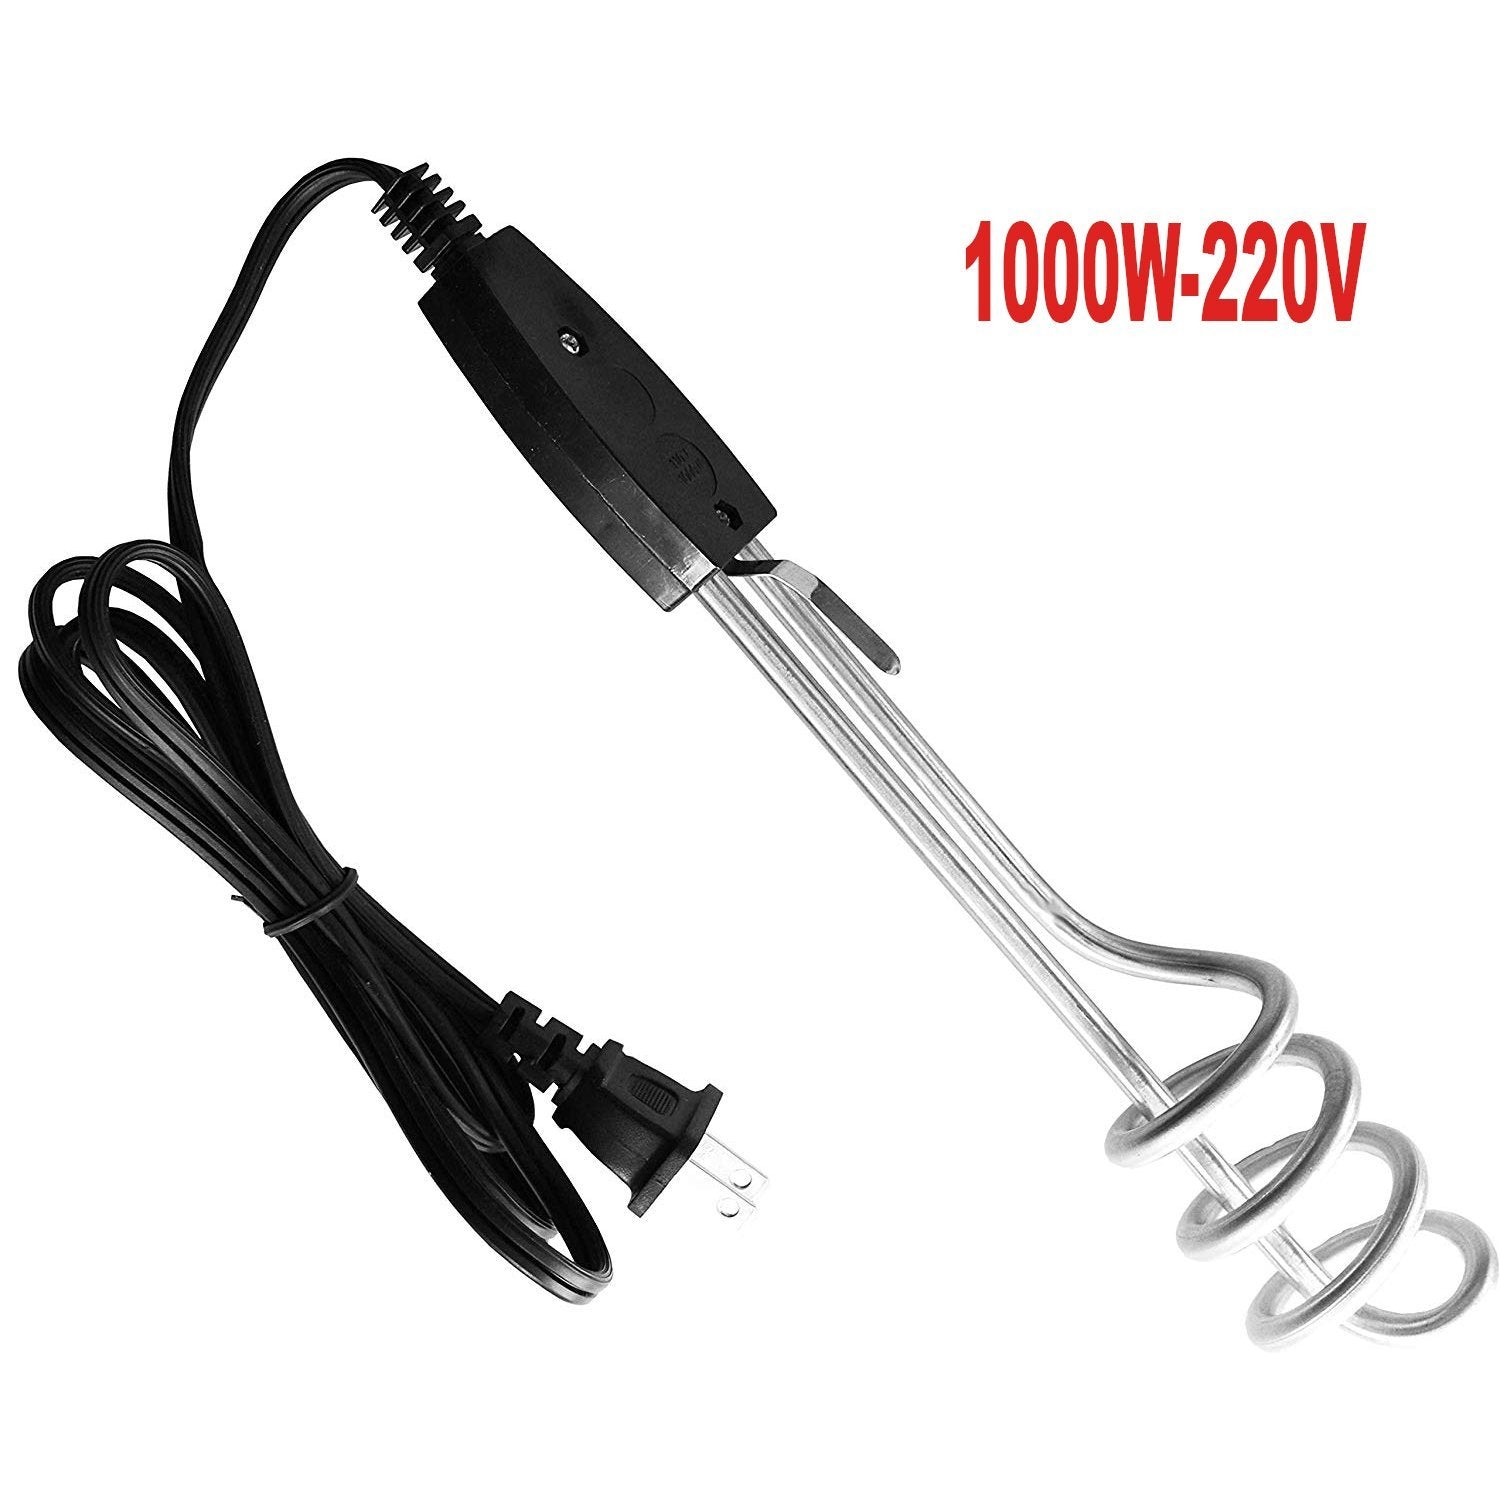 0188 1000W-220V Water Heater Portable Electric Immersion Element Boiler - SkyShopy